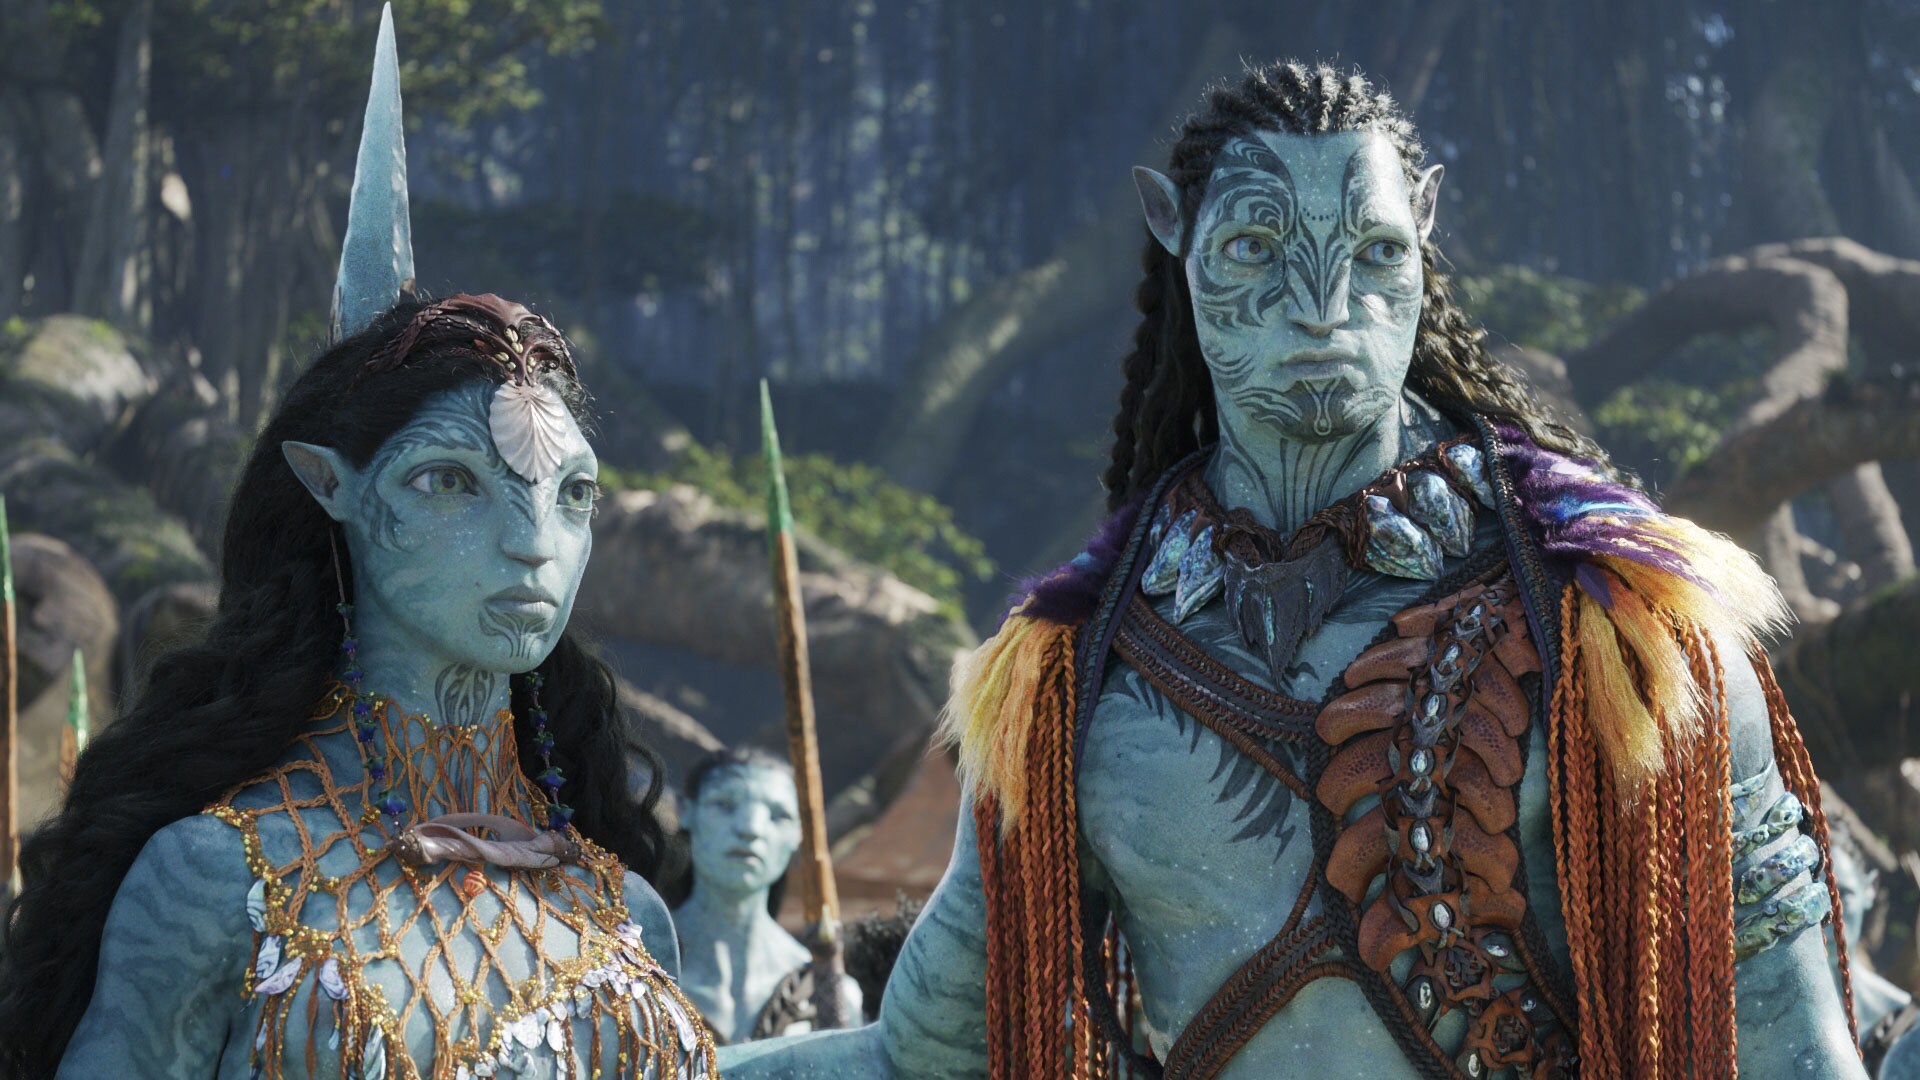 Image of characters from the 20th Century Studios movie Avatar: The Way of Water.